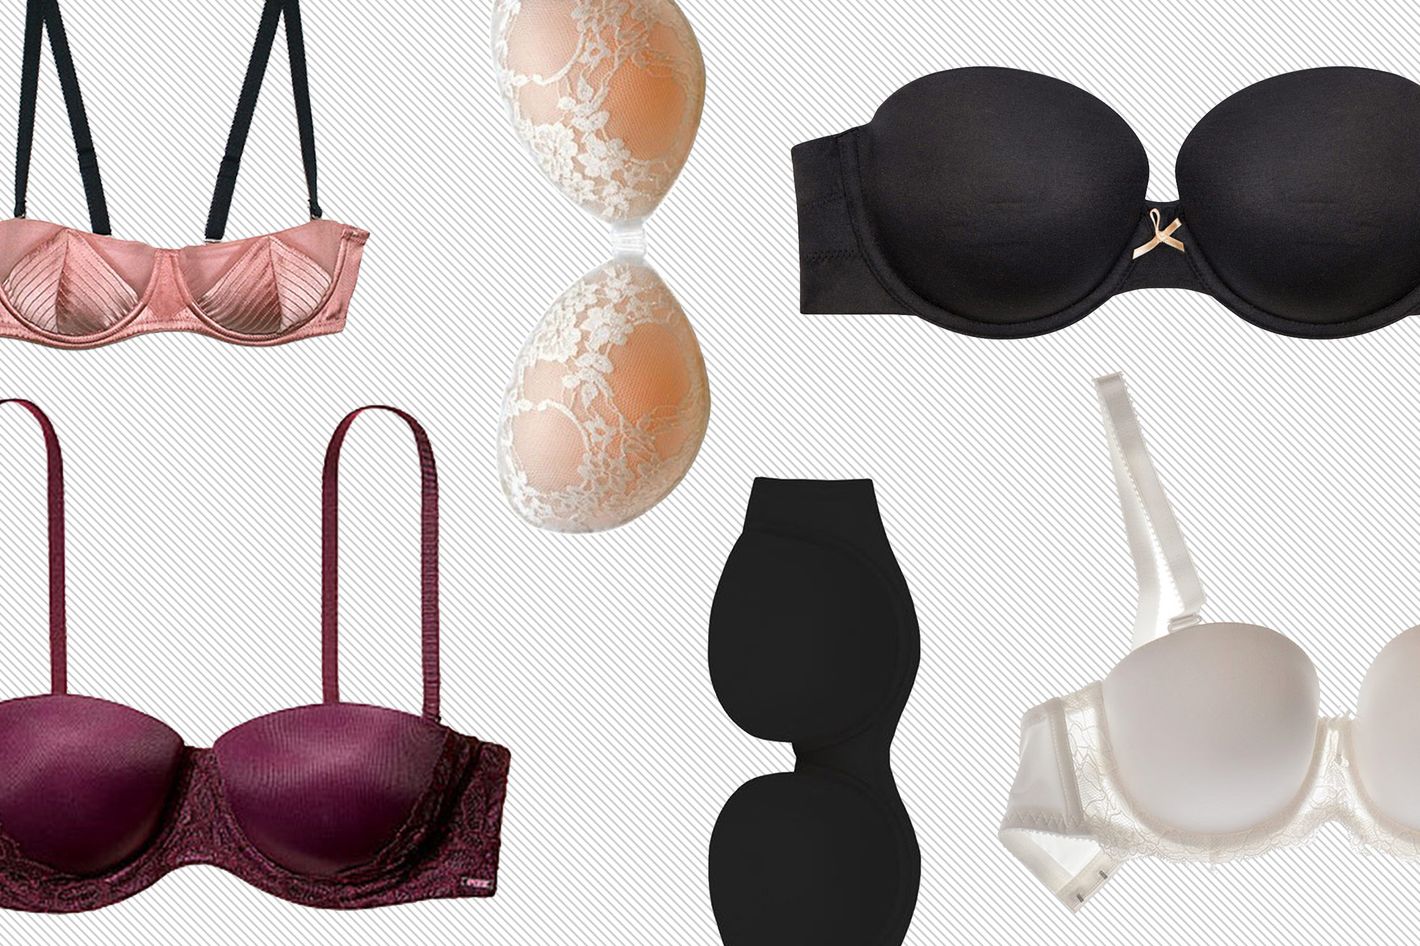 I'm a big boobie girlie and have found the best strapless bra